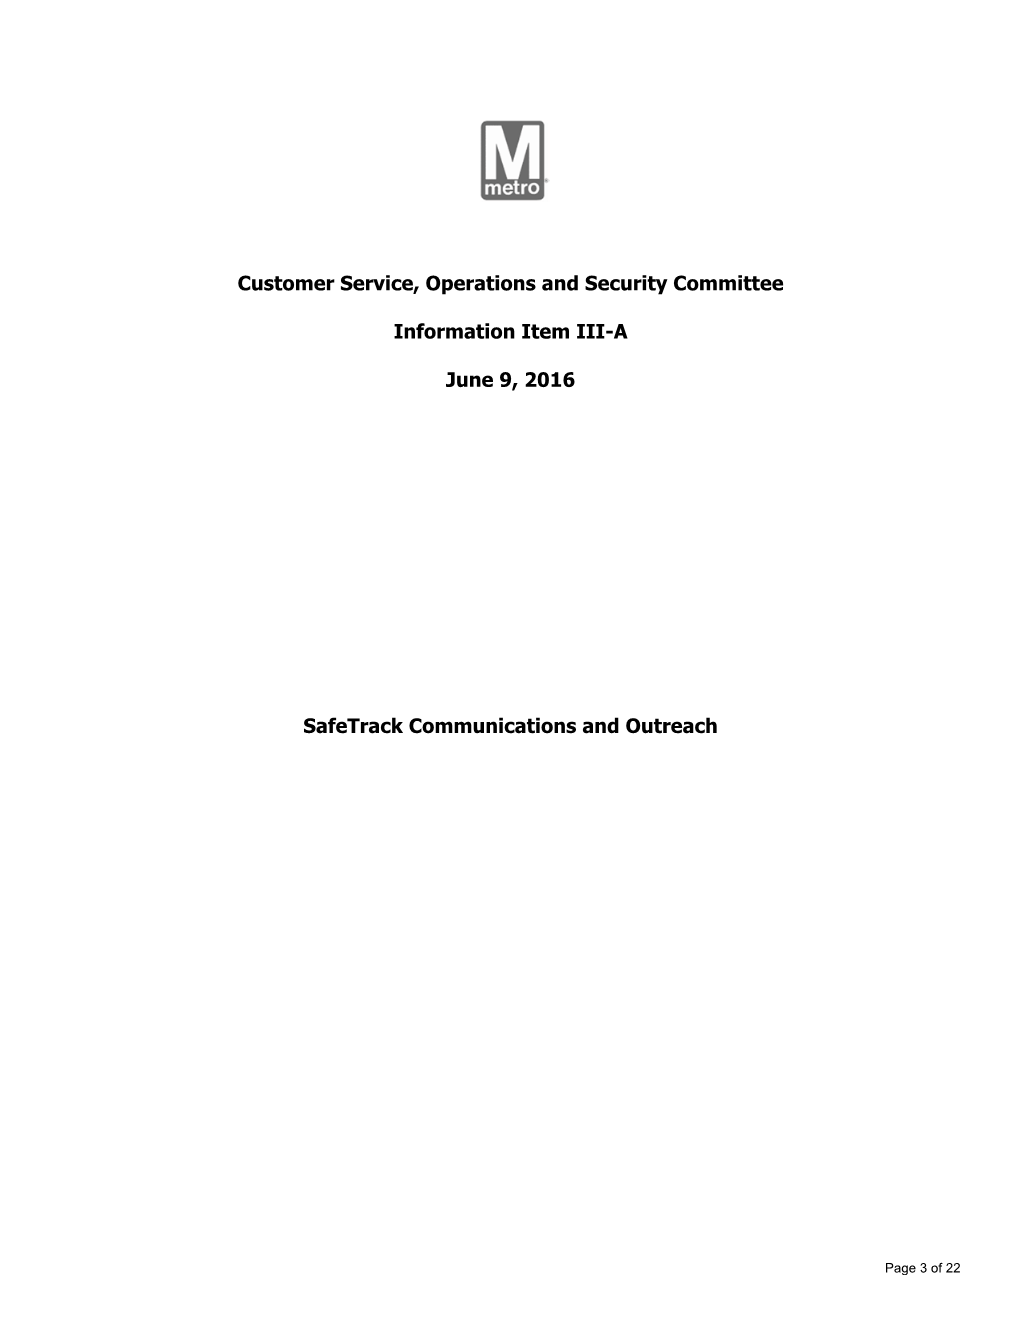 Customer Service, Operations and Security Committee Information Item III-A June 9, 2016 Safetrack Communications and Outreach